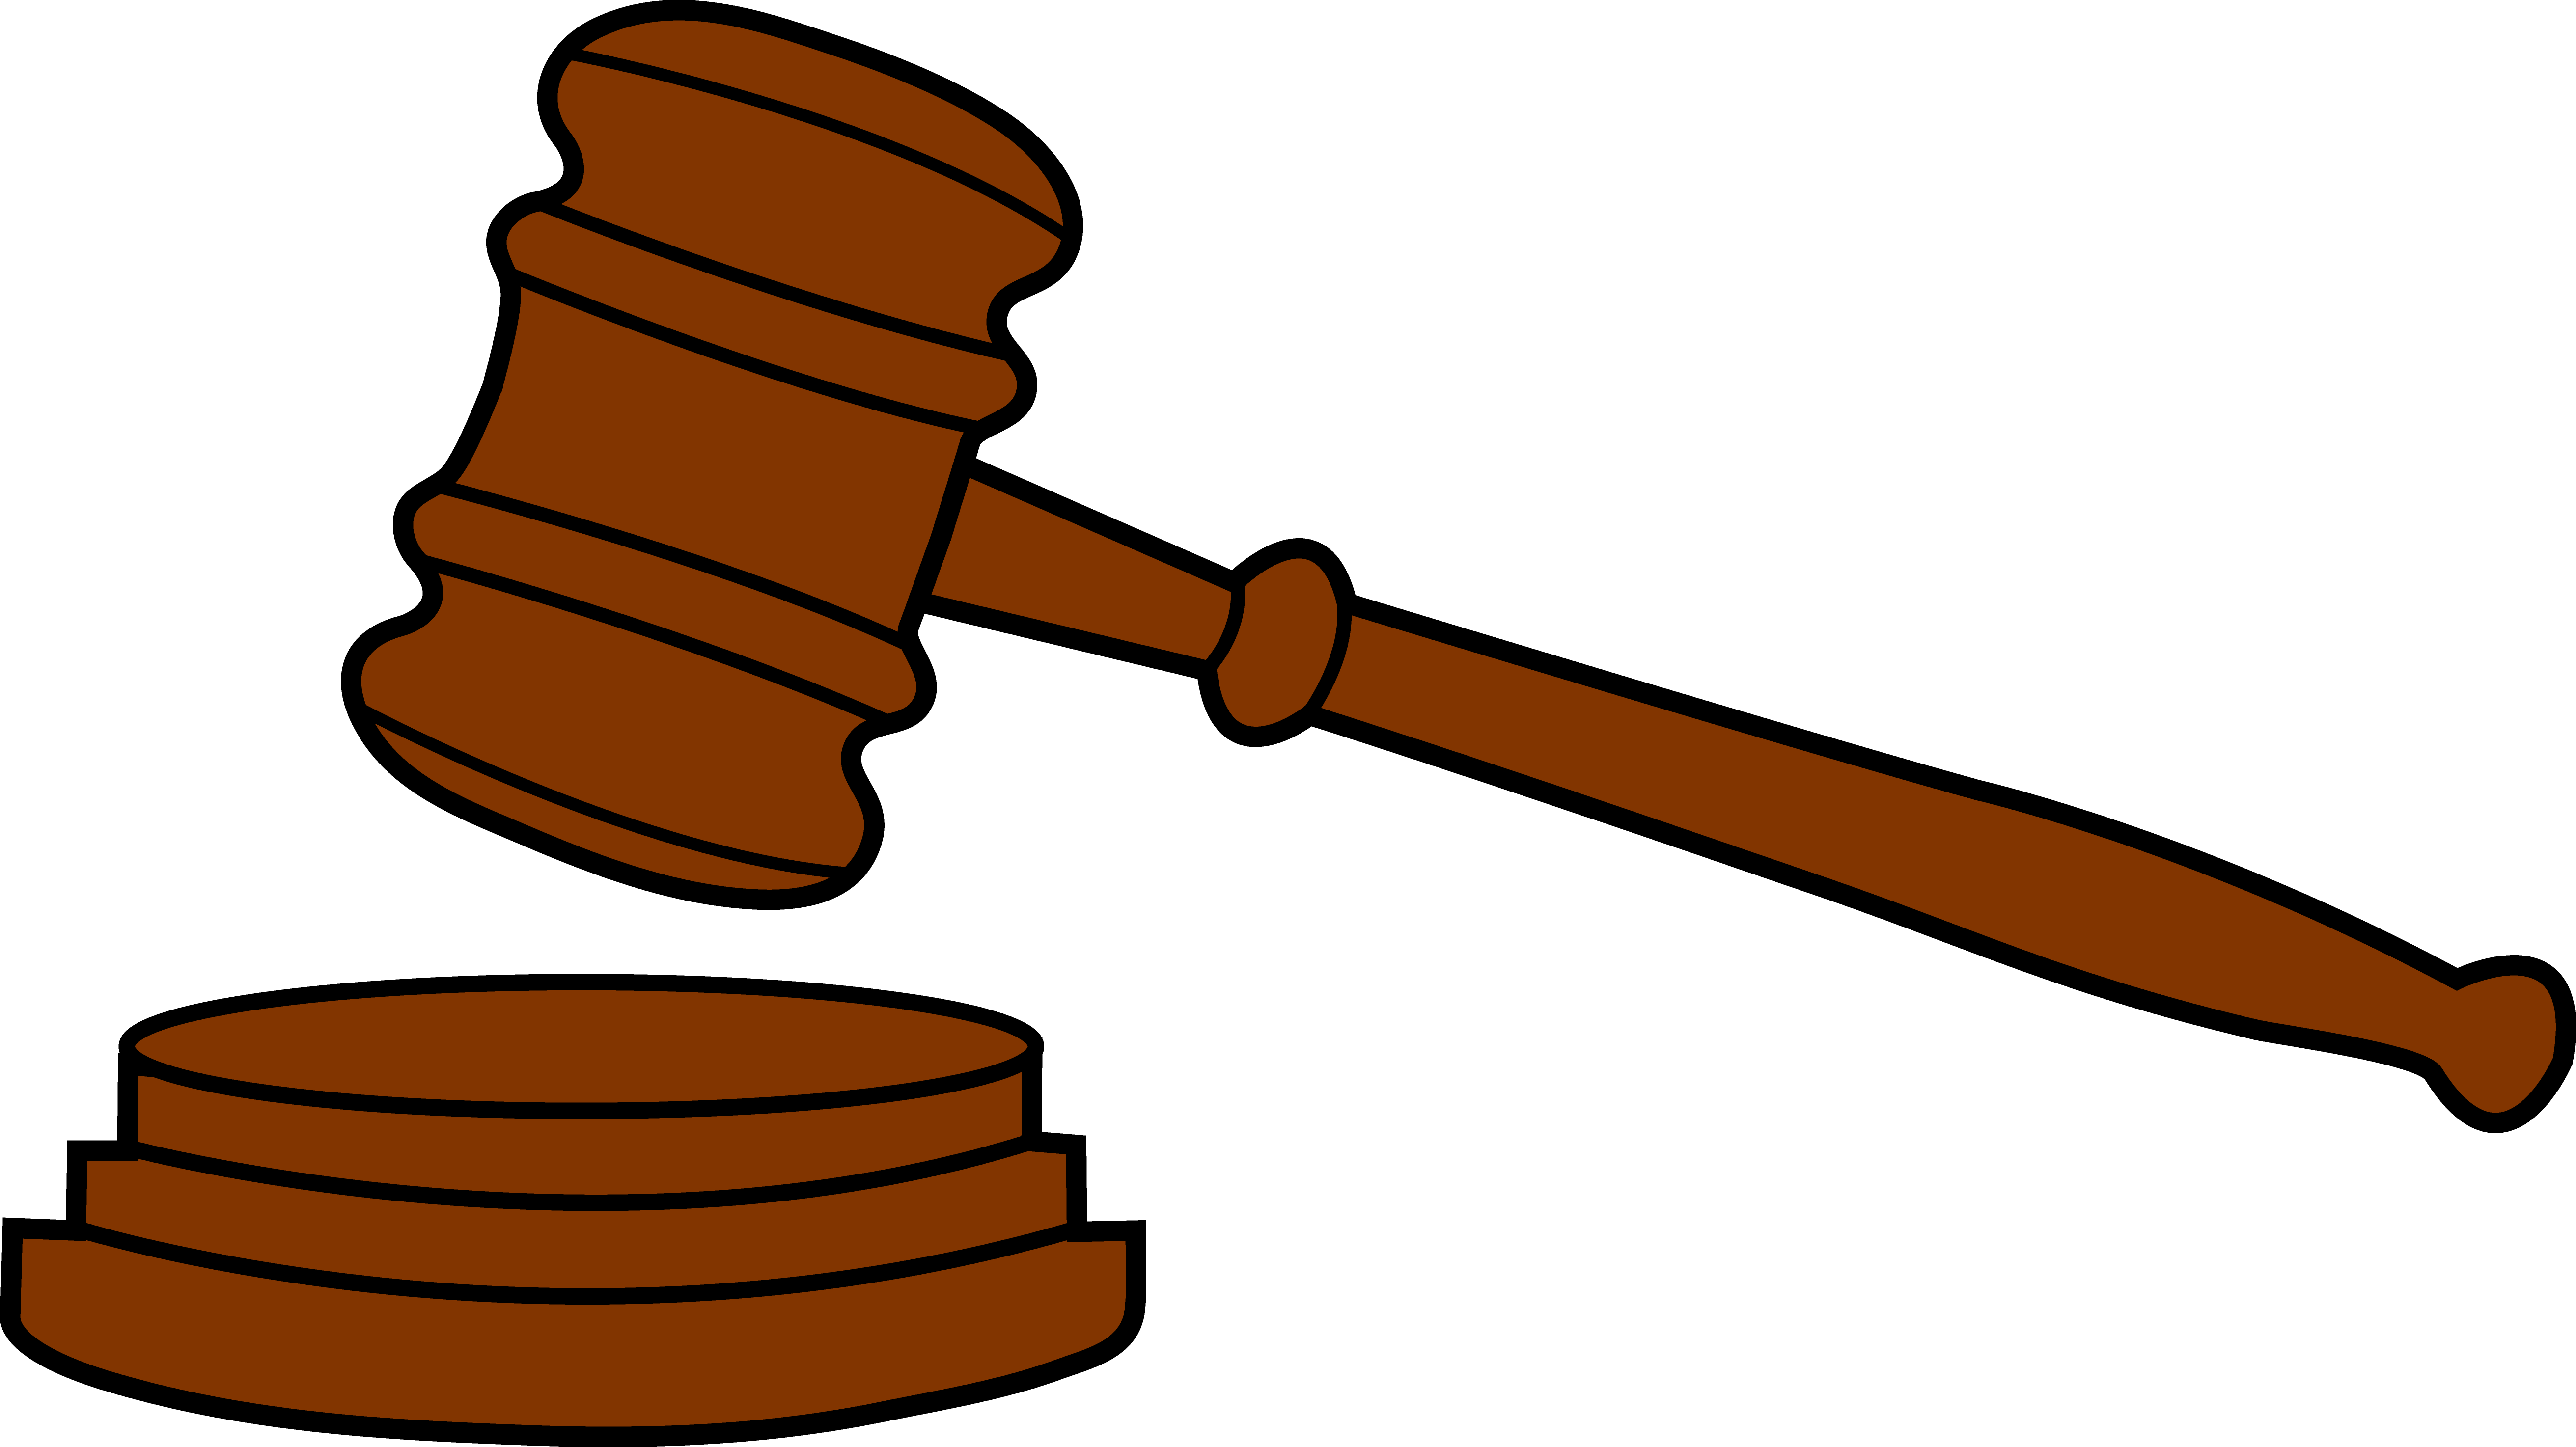  collection of law. Evidence clipart factor